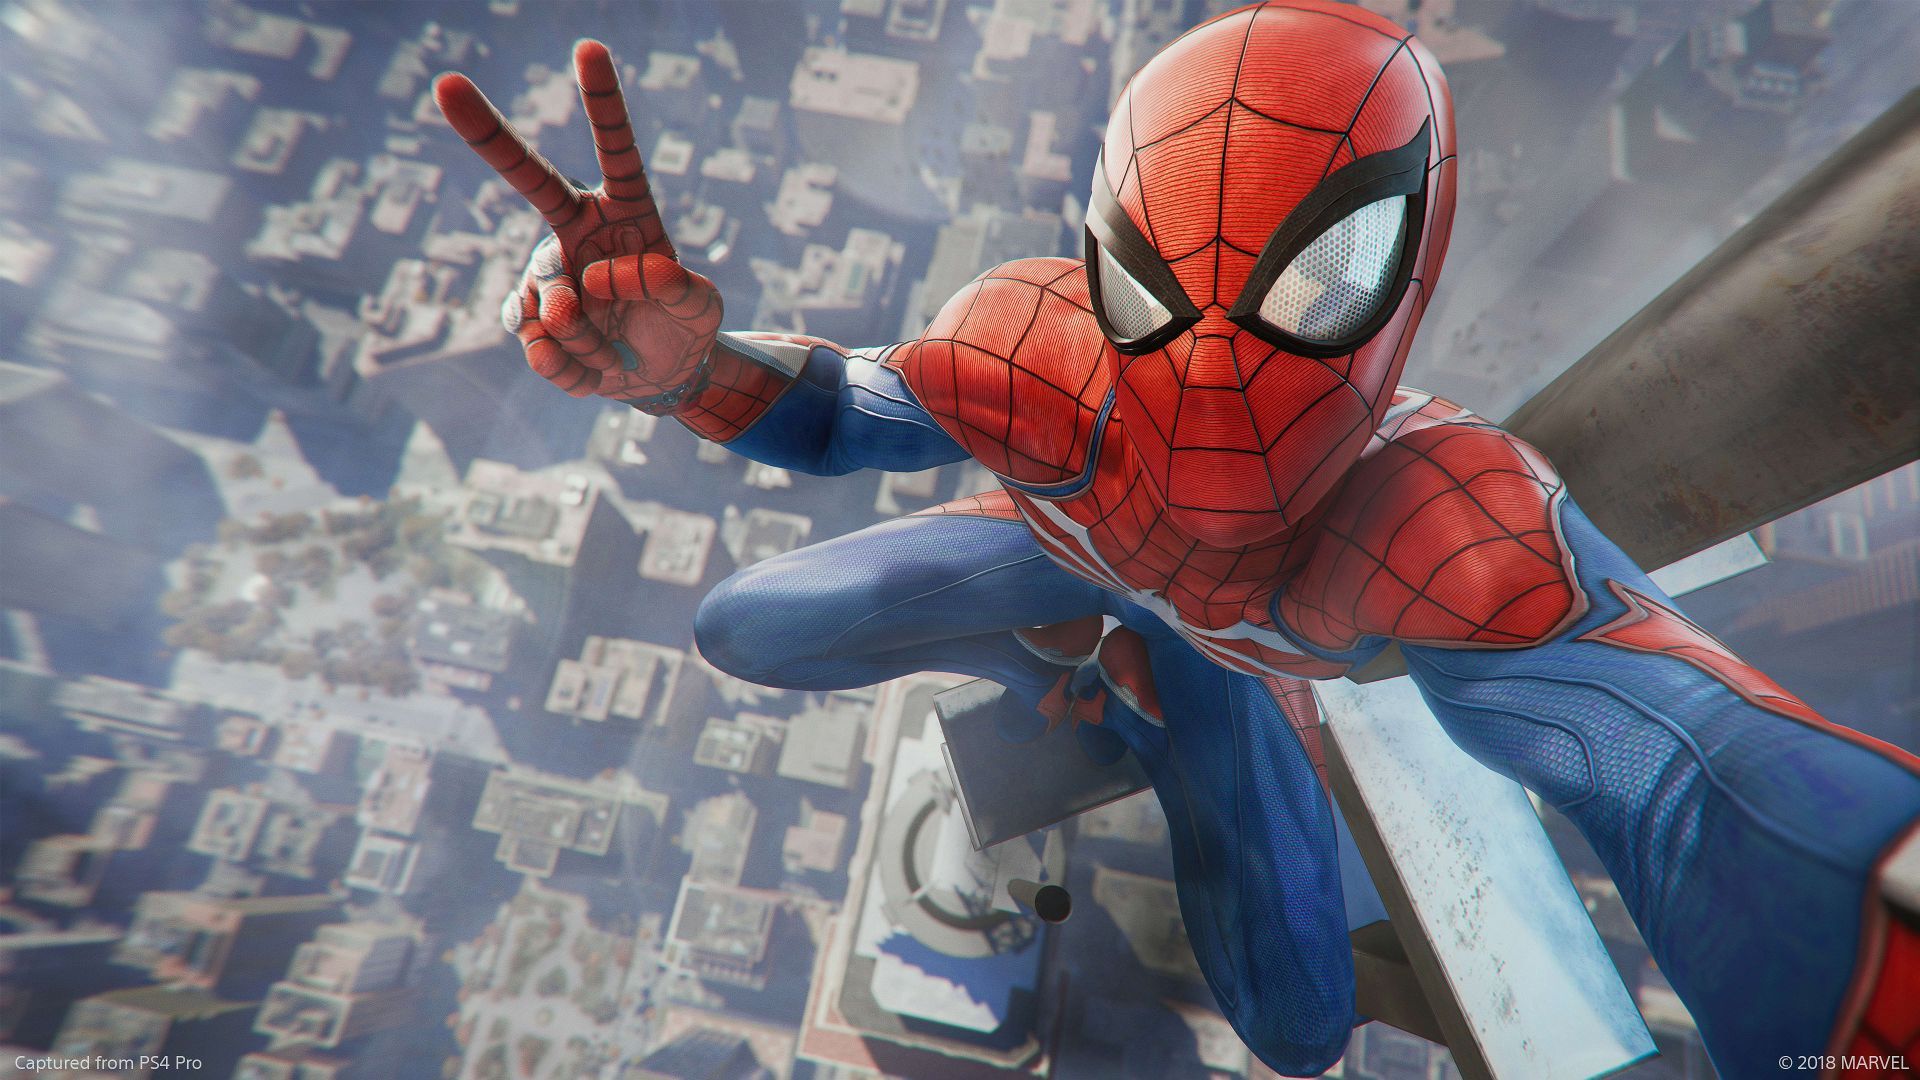 Insomniac Aims to Have Best Photo Mode Yet With Spider-Man